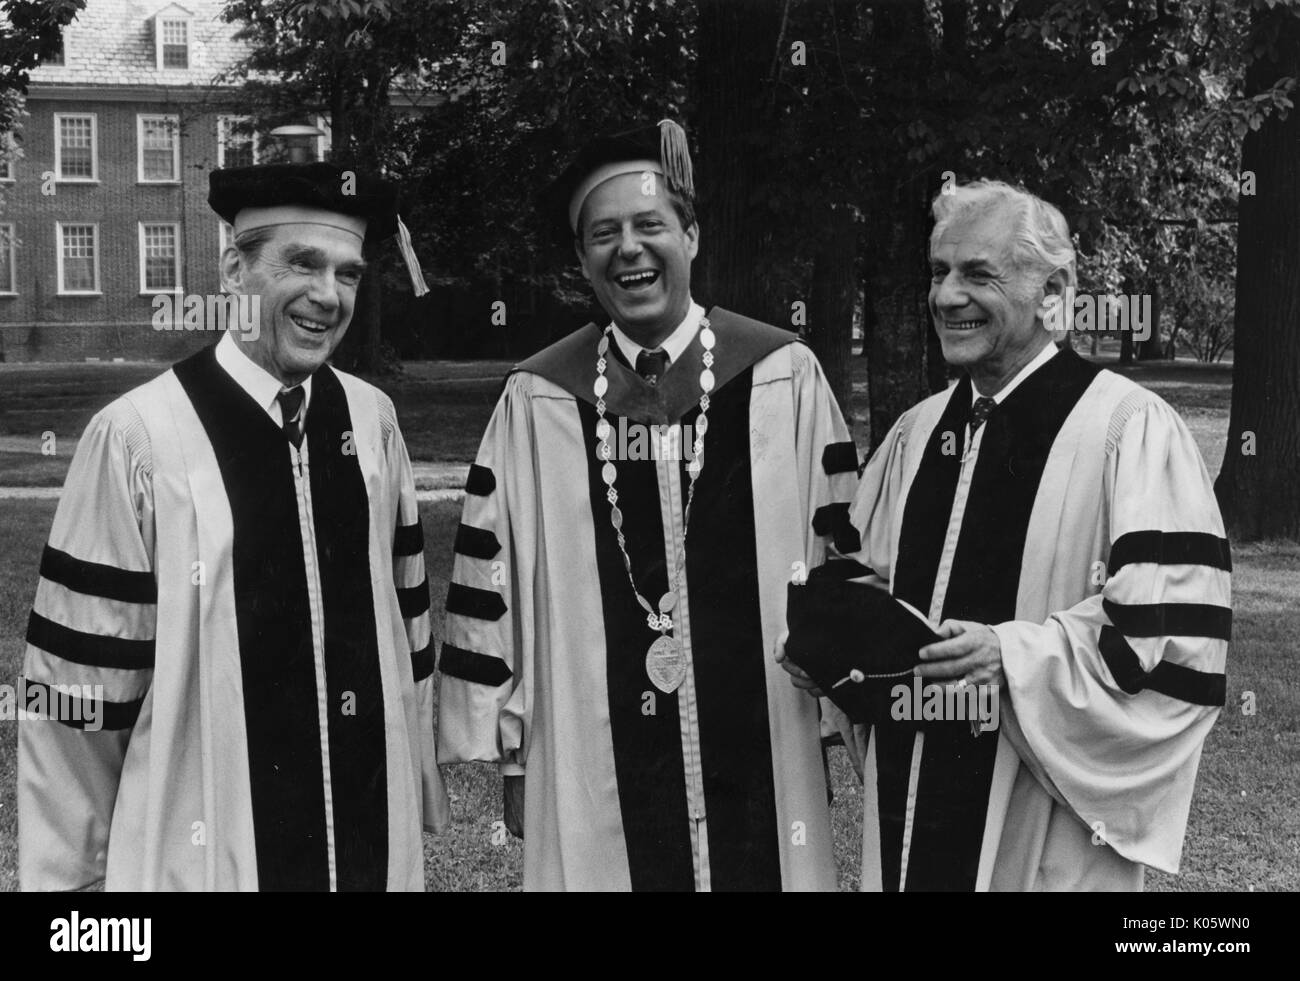 Half-body portrait of three men at Johns Hopkins commencement in 1980, all wearing cap and gown attire, standing on a campus quad, with smiling facial expressions, from left to right, Daniel K Ludwig, President Steven Muller, and musician Leonard Bernstein, May 30, 1980. Stock Photo